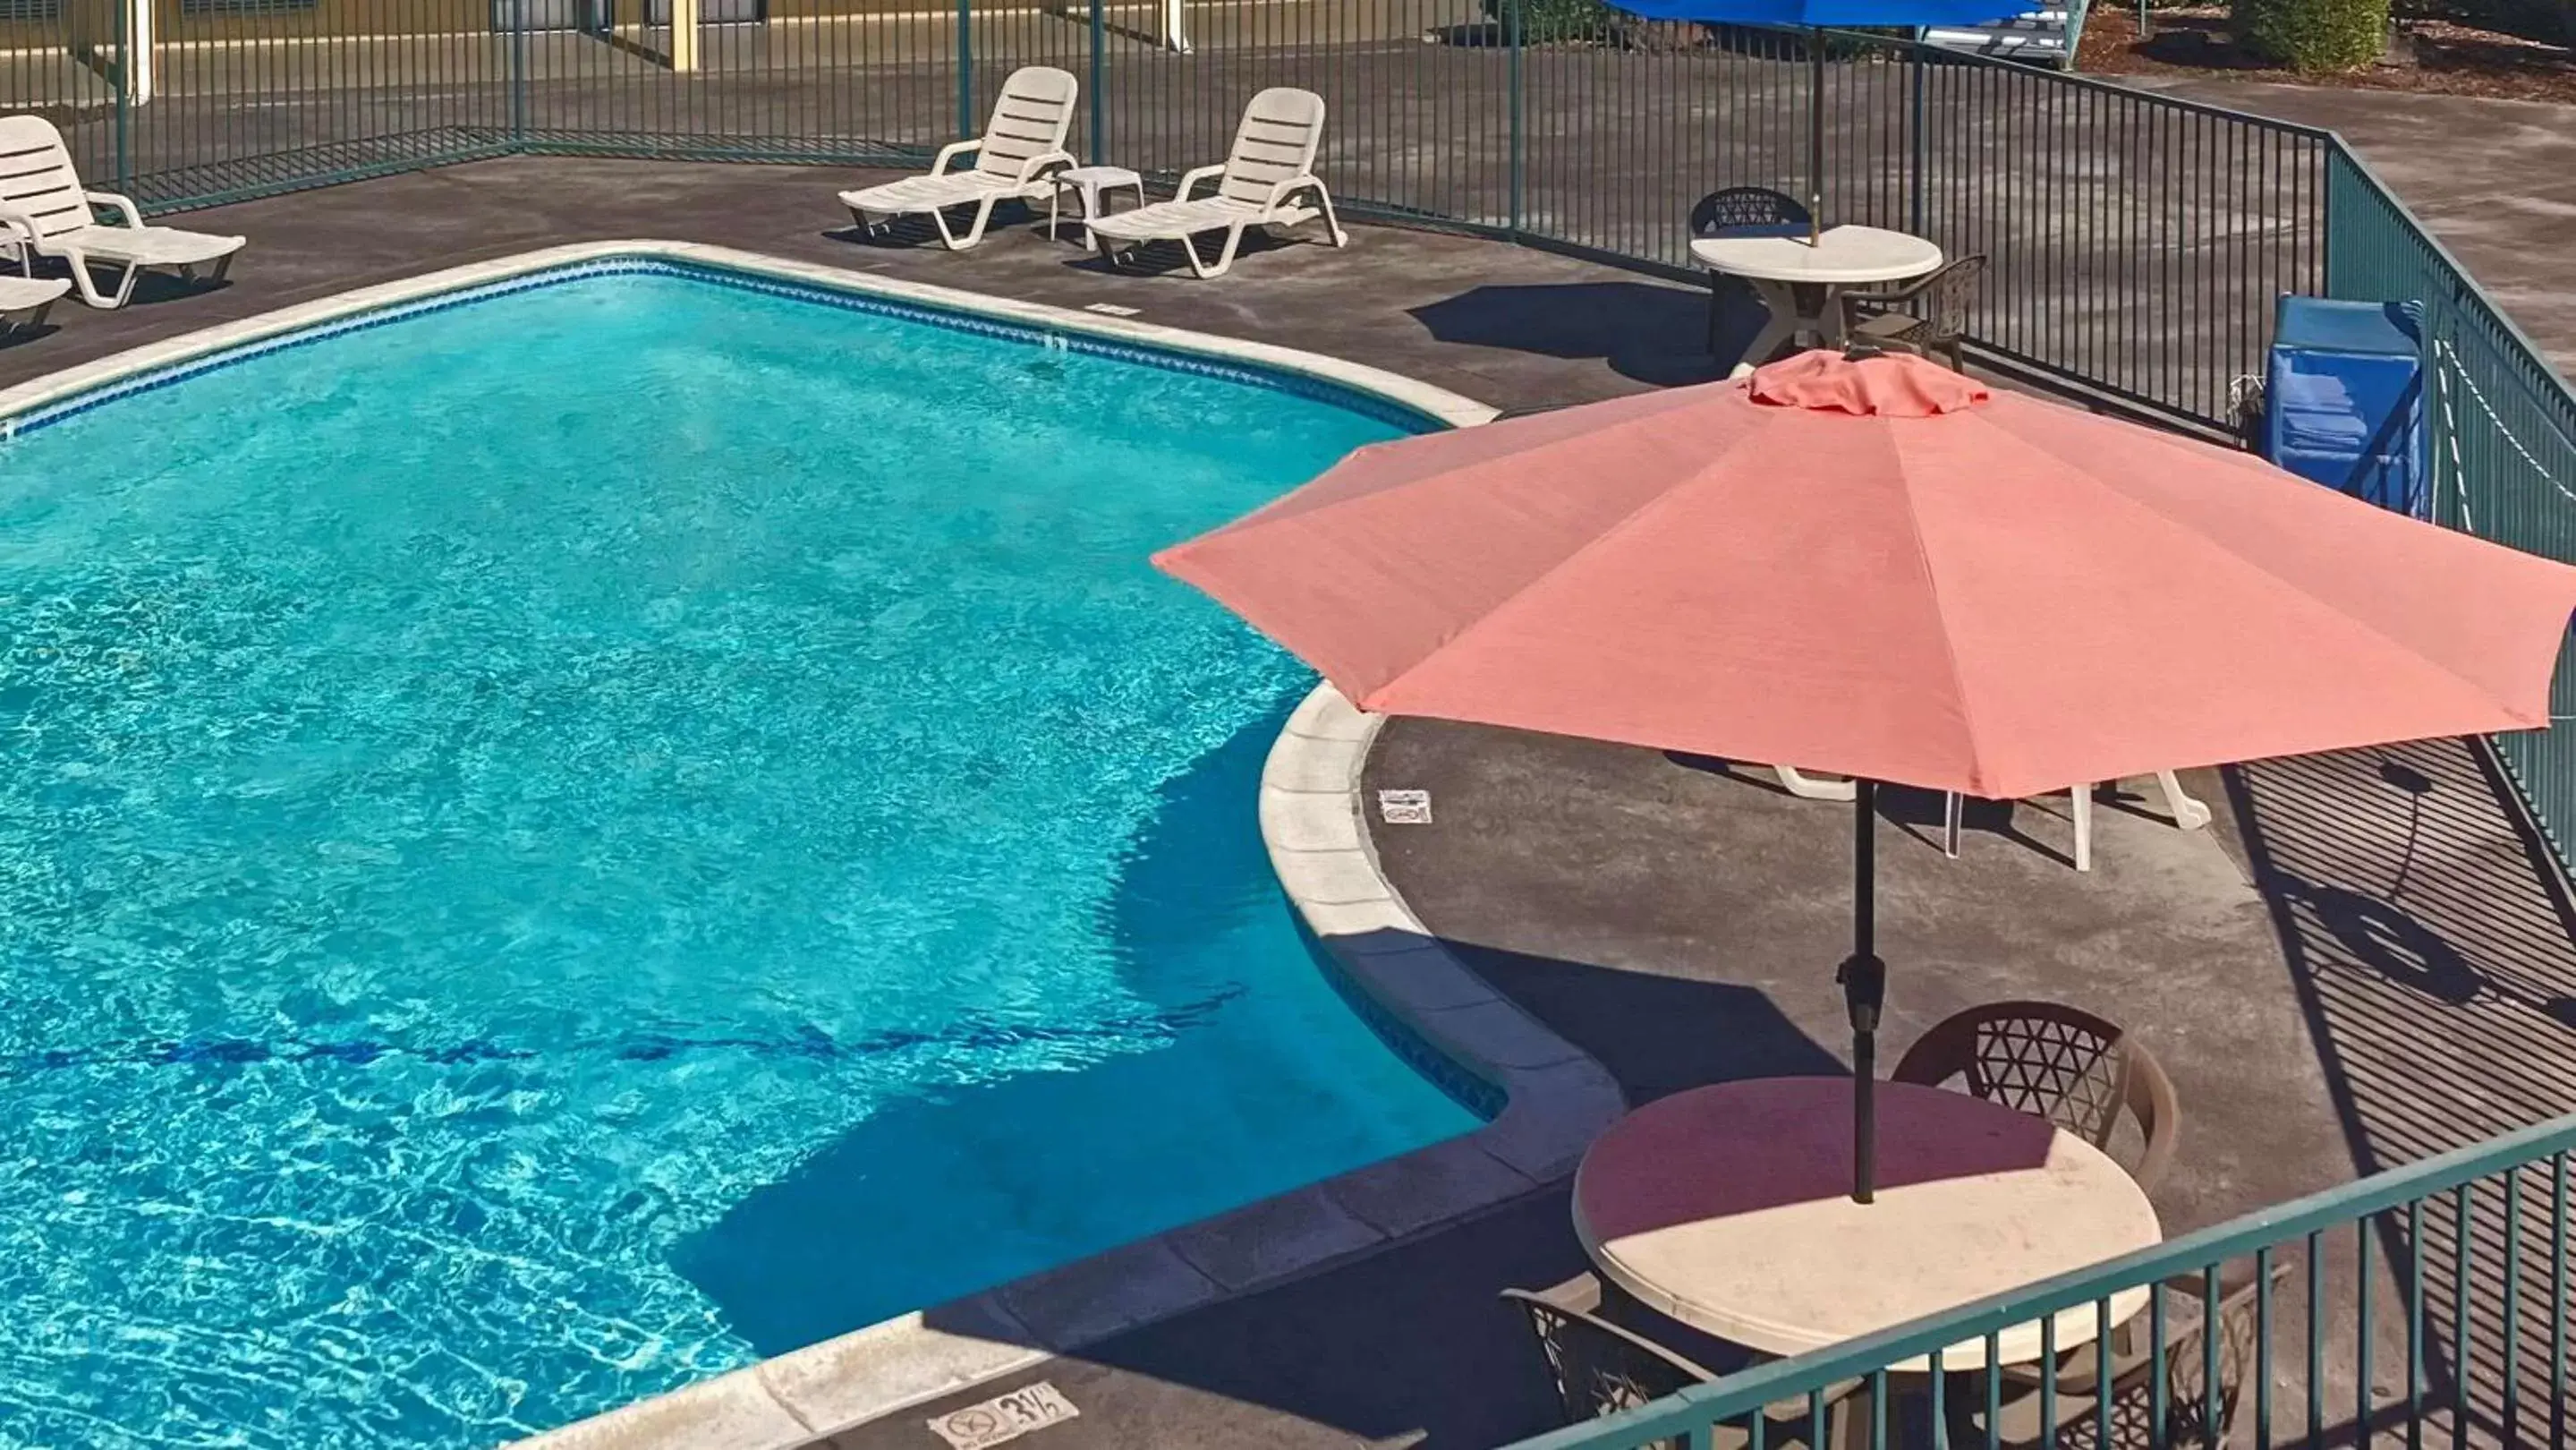 Pool View in Quality Inn & Suites near Downtown Bakersfield